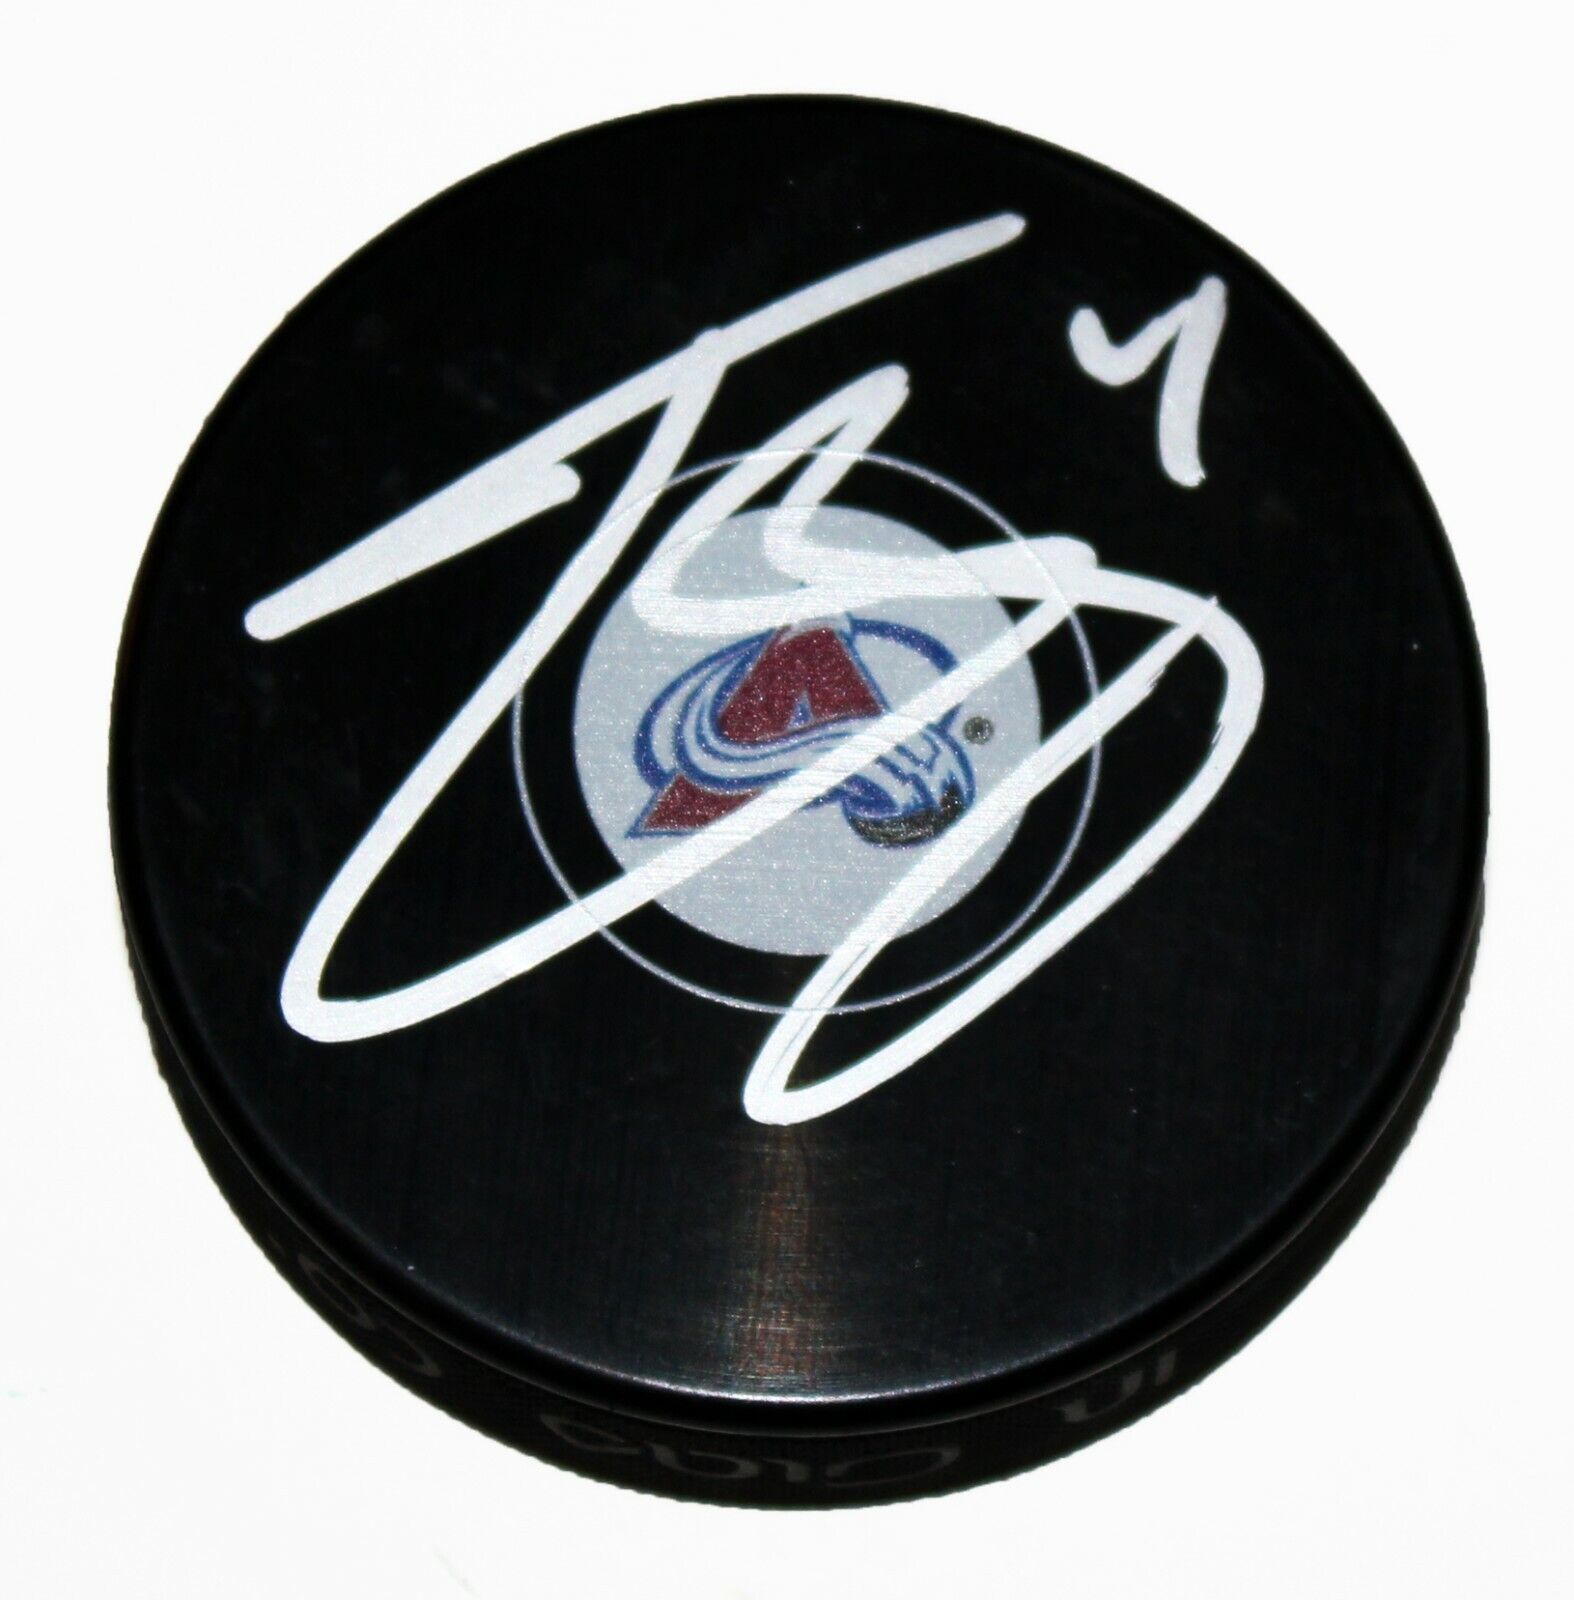 TYSON BARRIE SIGNED COLORADO AVALANCHE PUCK TORONTO MAPLE LEAFS AUTOGRAPHED COA